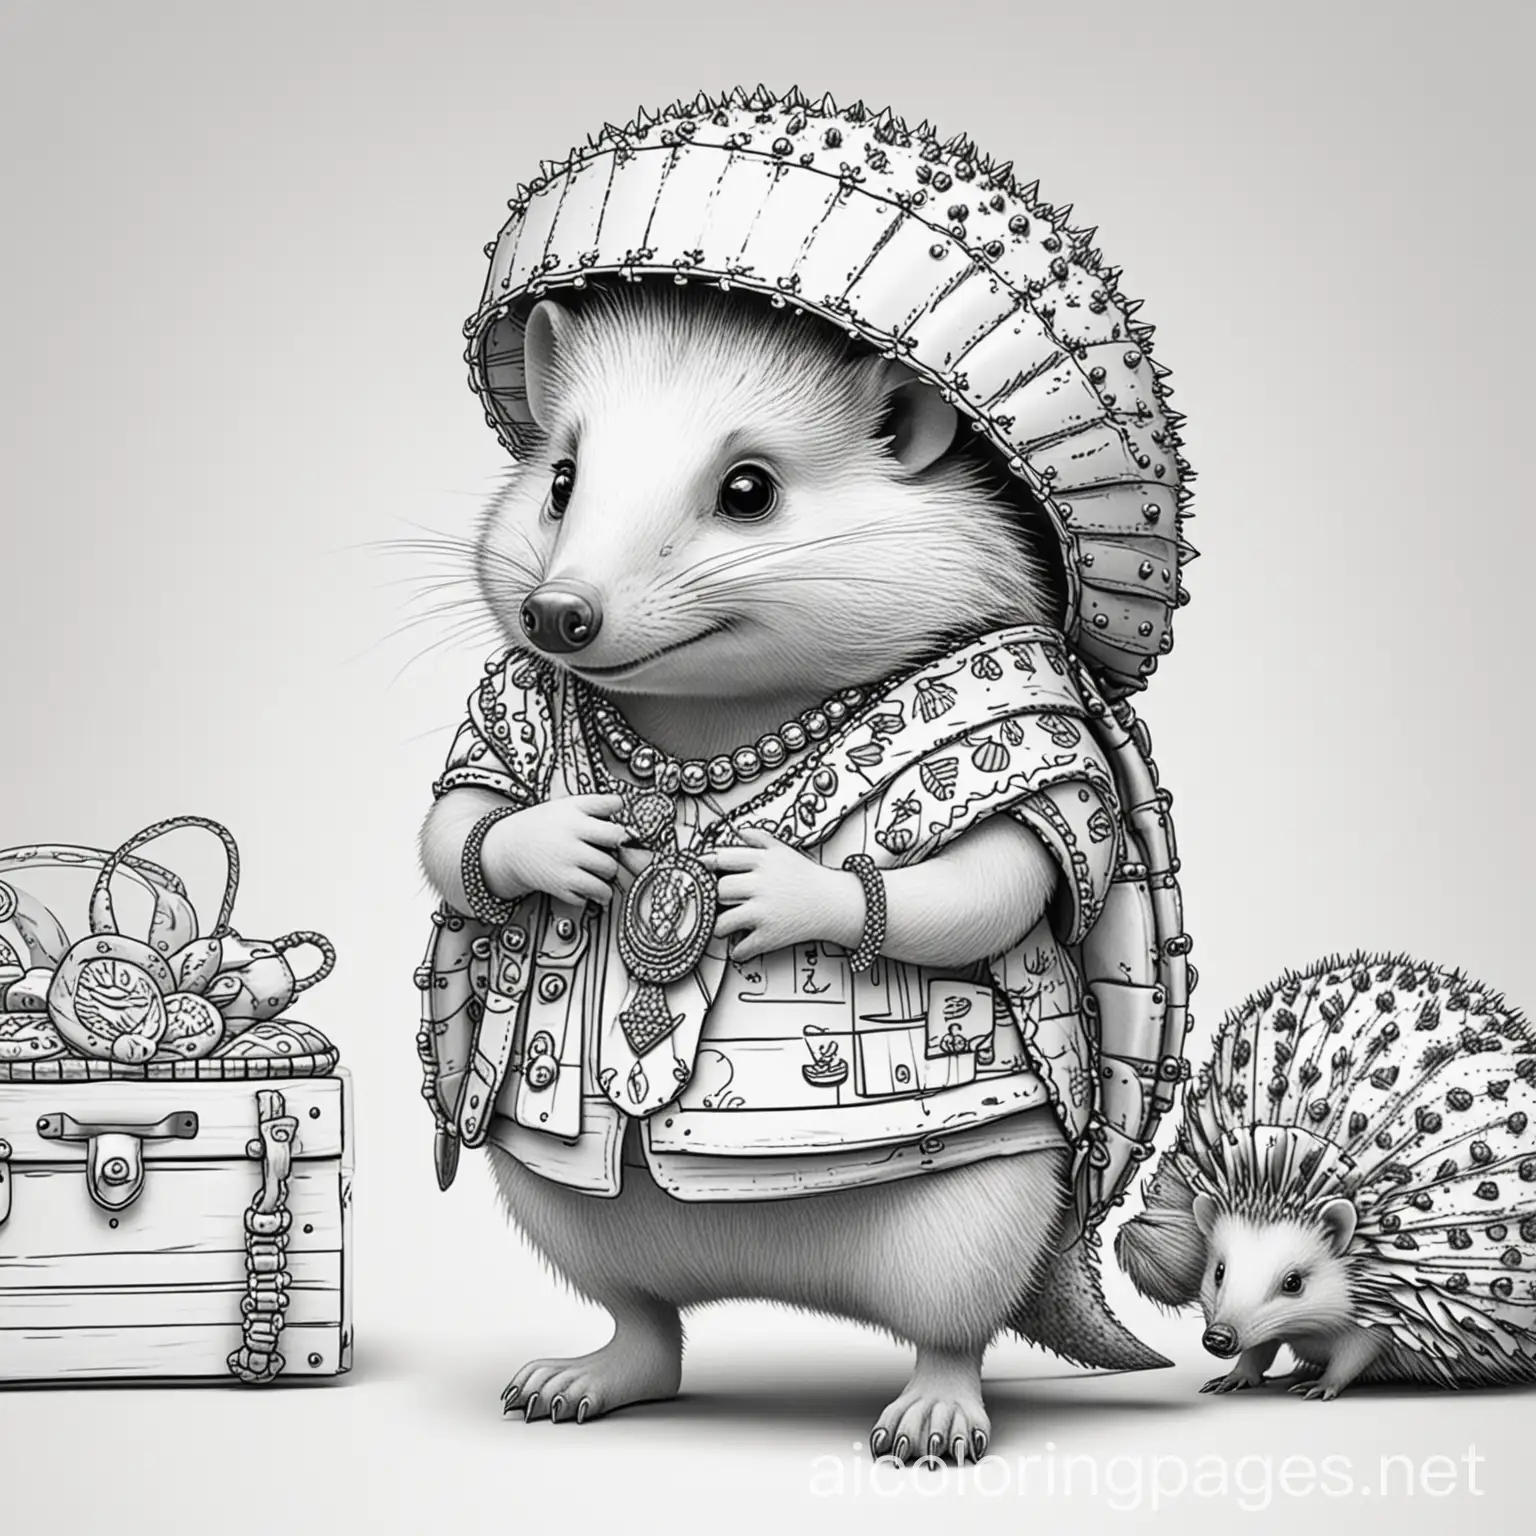 Armadillos cartoon style in clothes  have a jewlry shop selling to a hedgehog , Coloring Page, black and white, line art, white background, Simplicity, Ample White Space. The background of the coloring page is plain white to make it easy for young children to color within the lines. The outlines of all the subjects are easy to distinguish, making it simple for kids to color without too much difficulty